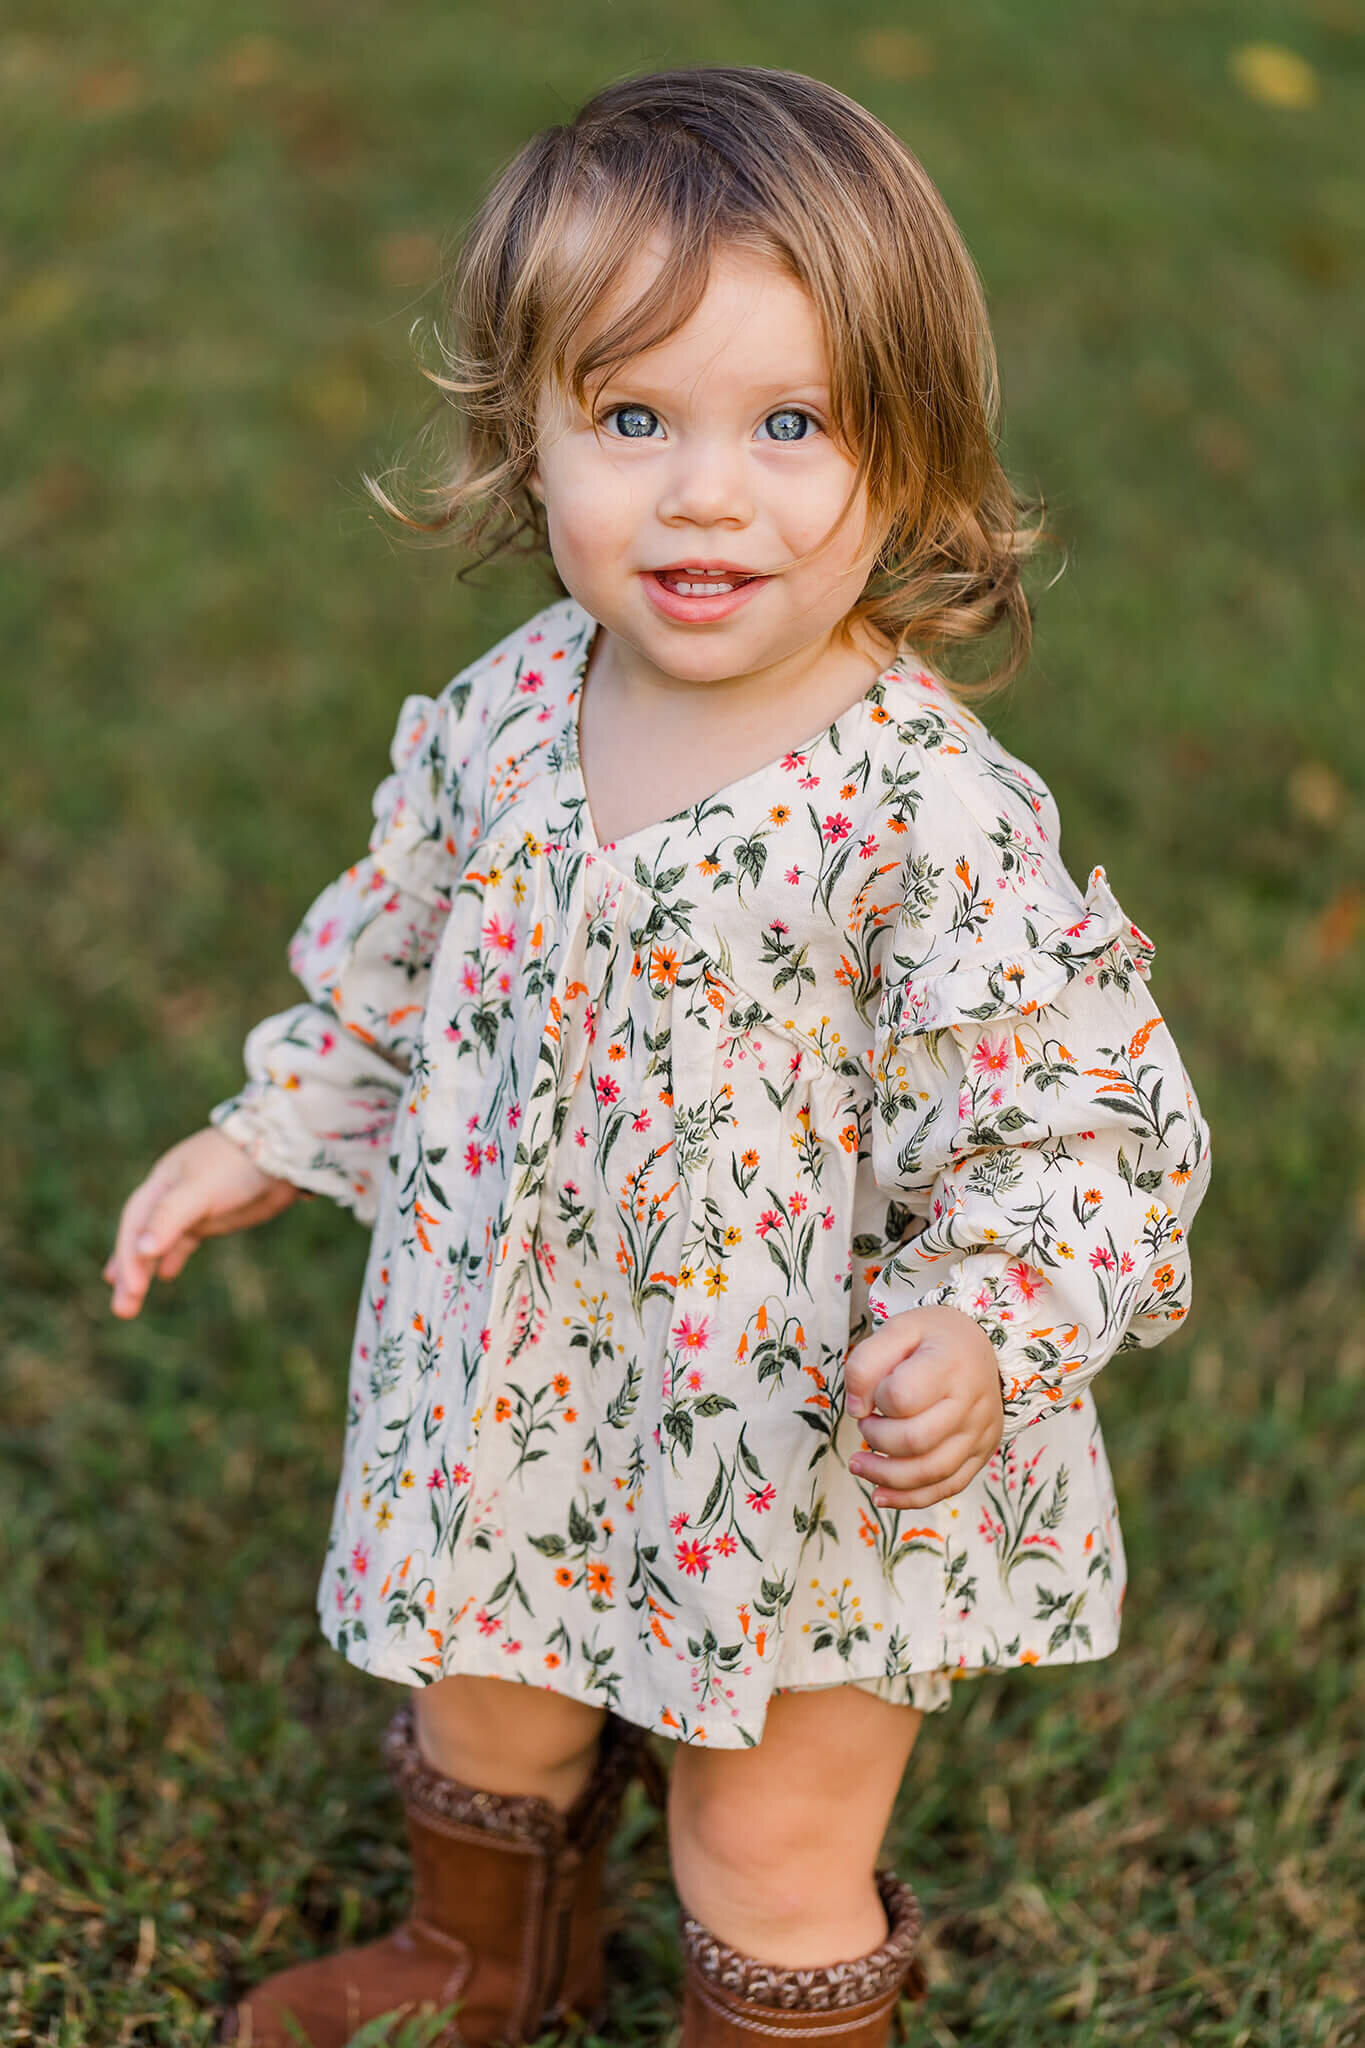 A little girl standing in the grass in a floral romper during a family photography session in a park in Northern Virginia.